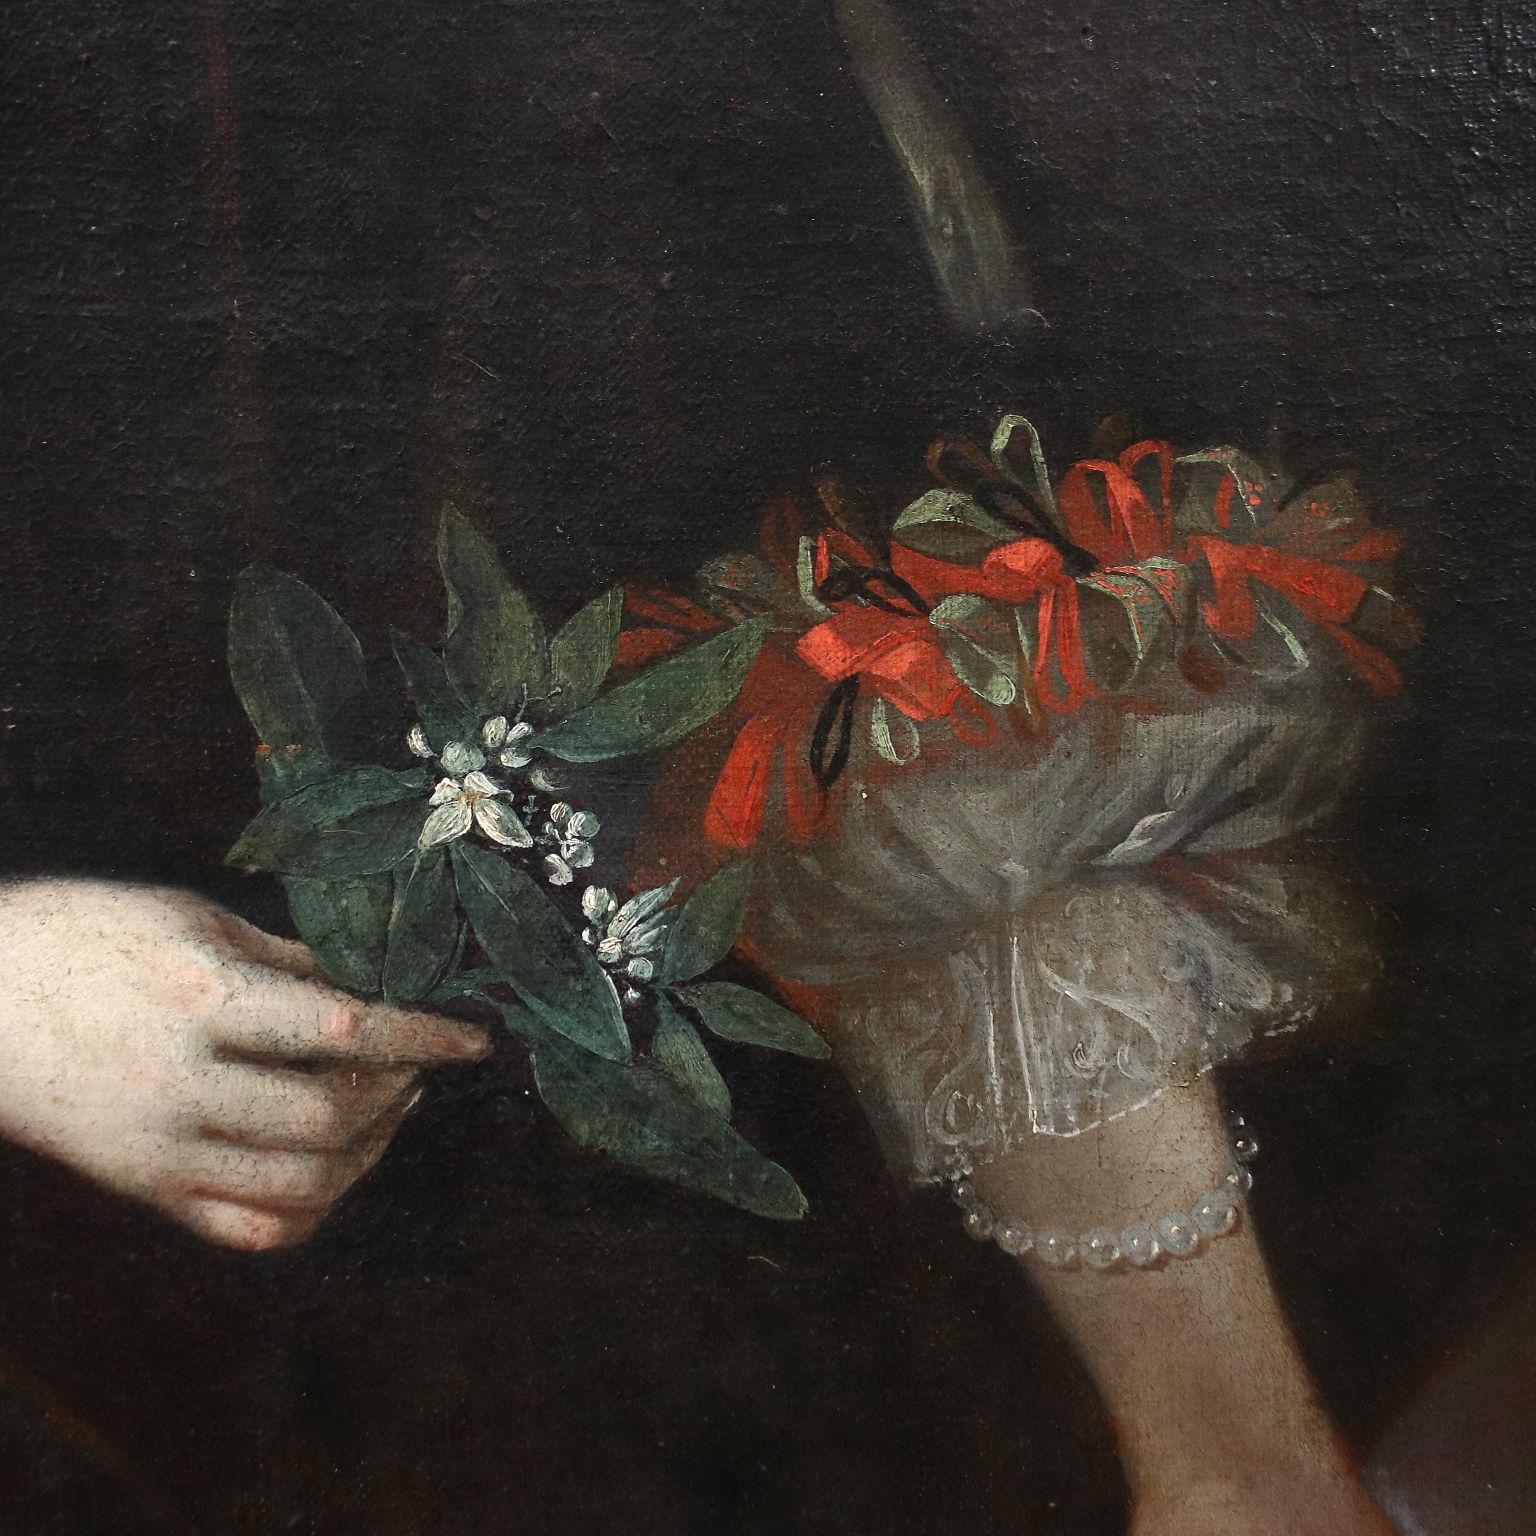 Oil painting on canvas. Lombard school of the seventeenth century. A smiling young girl is portrayed in an elegant black dress, embellished with lace on the neckline and a play of red and green laces and ribbons on the sleeves, which match the red